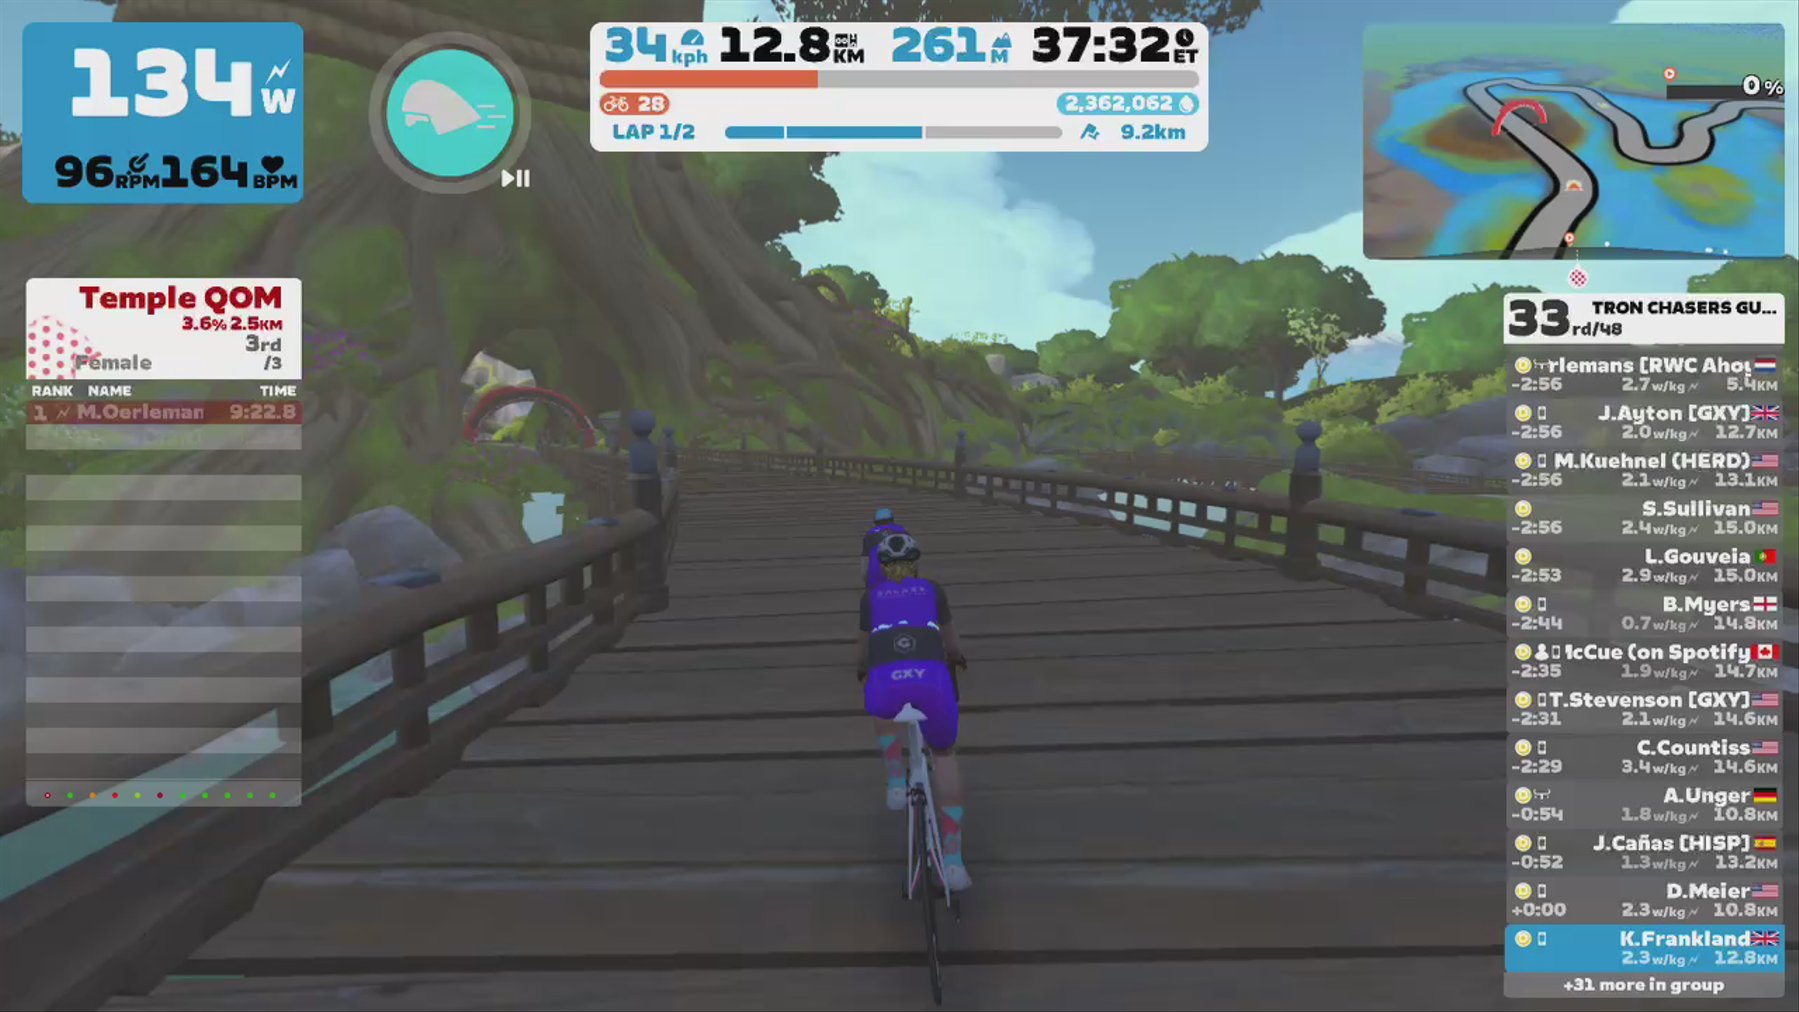 Zwift - Group Ride: TRON CHASERS GUIDE TO THE GALAXY [1.8-2.4 WKG] CAT D (D) on Kappa Quest in Makuri Islands